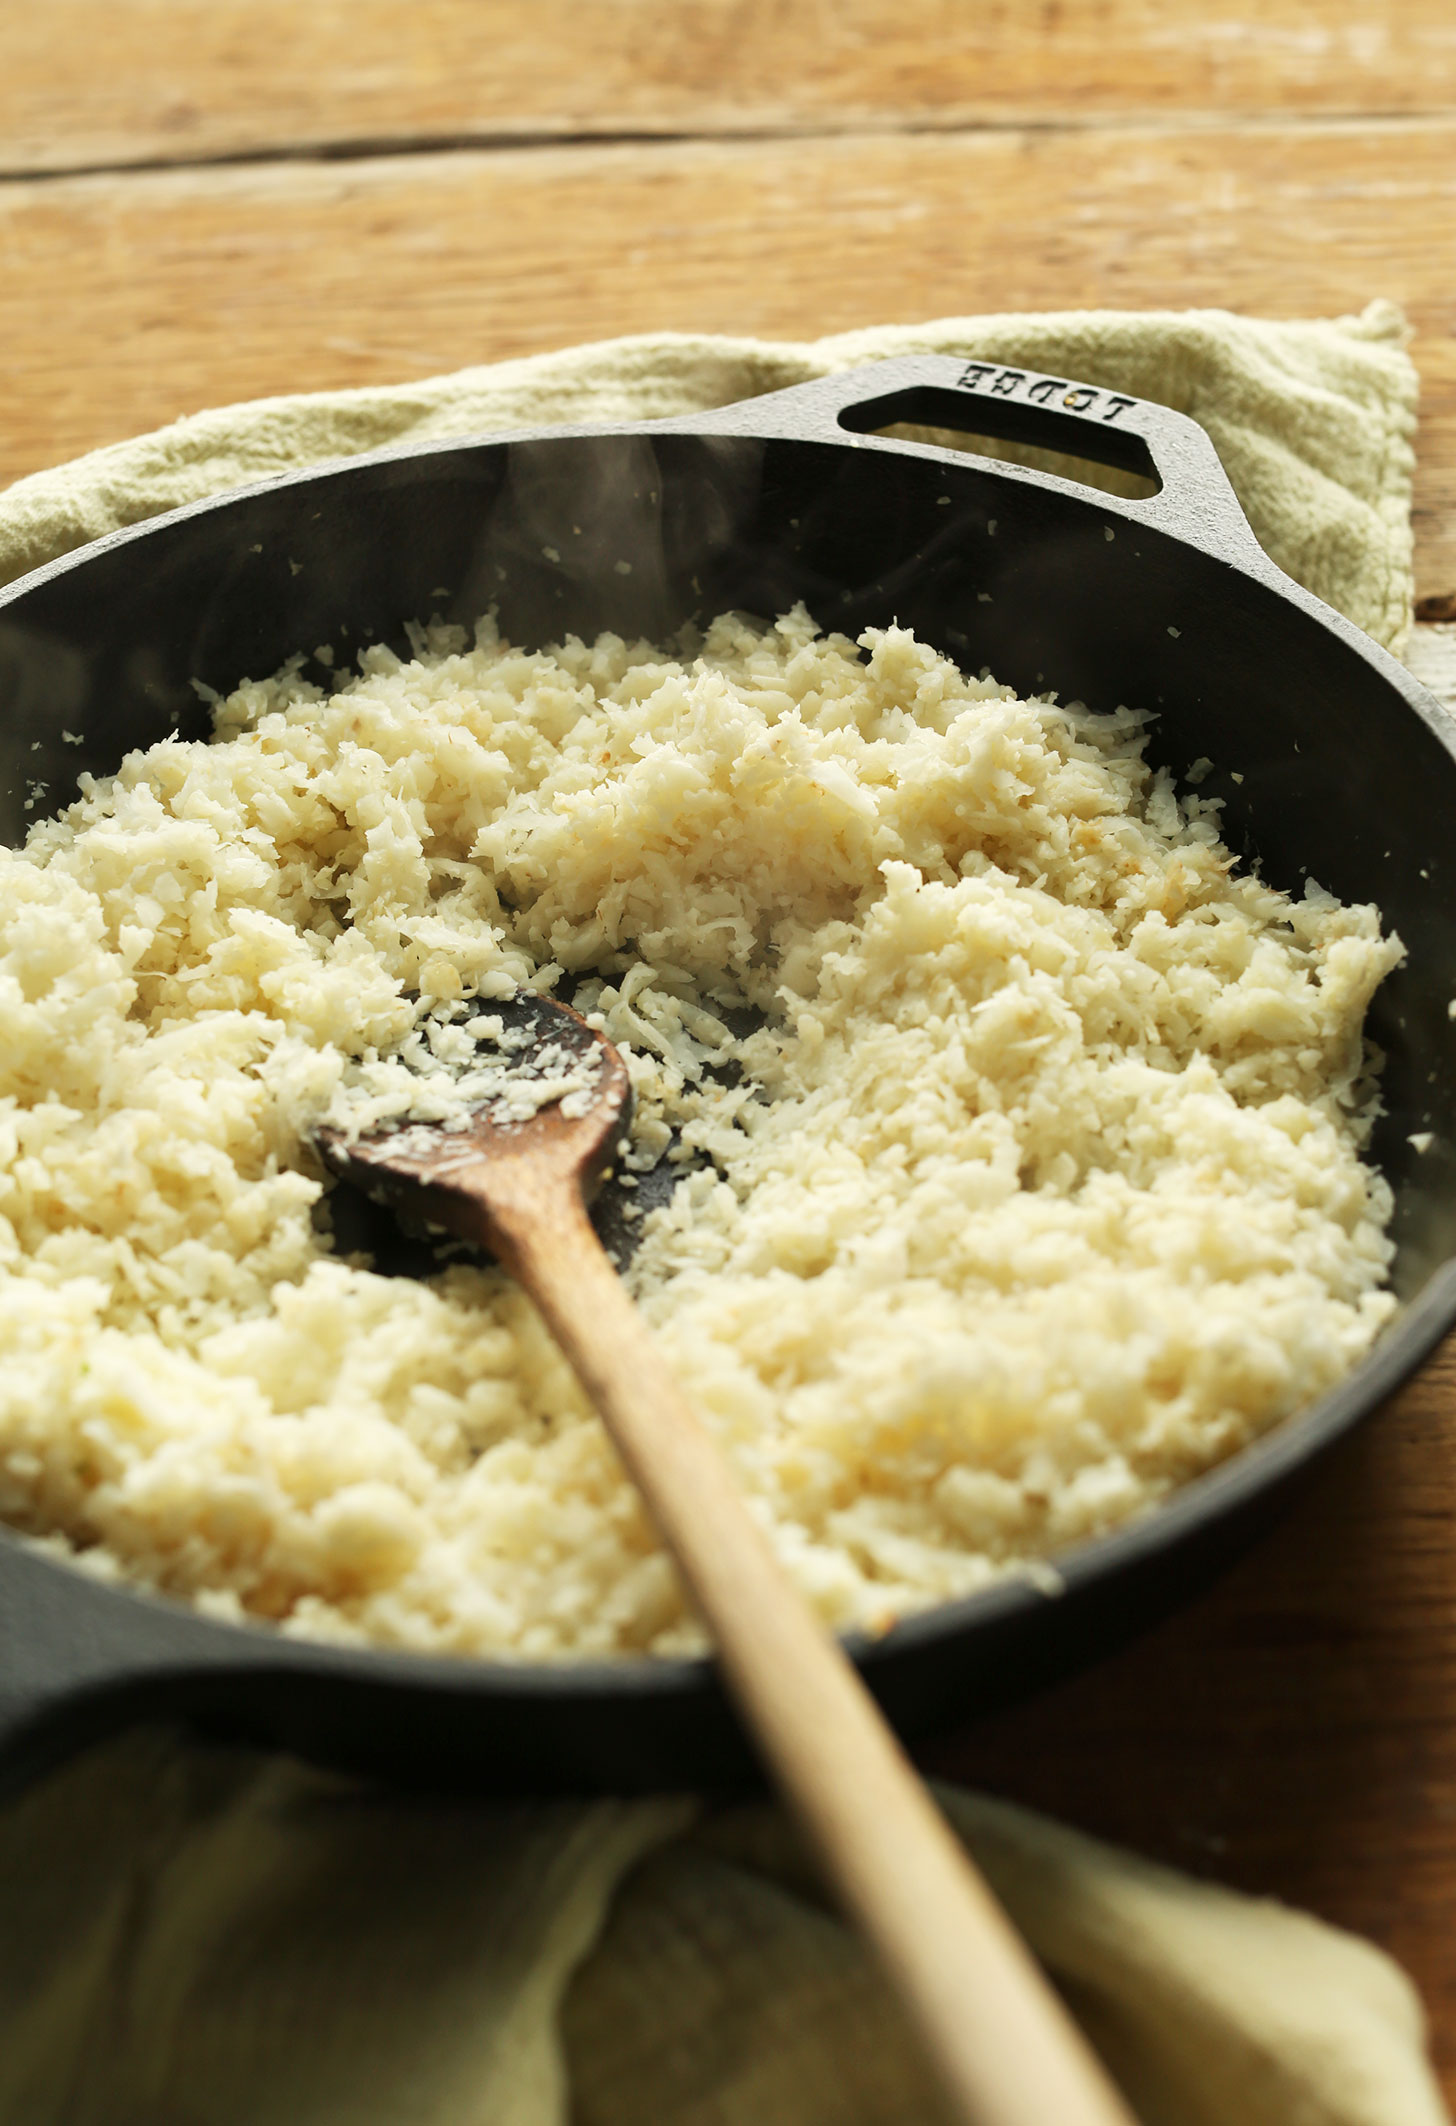 Wooden spoon in a cast-iron skillet of cauliflower rice